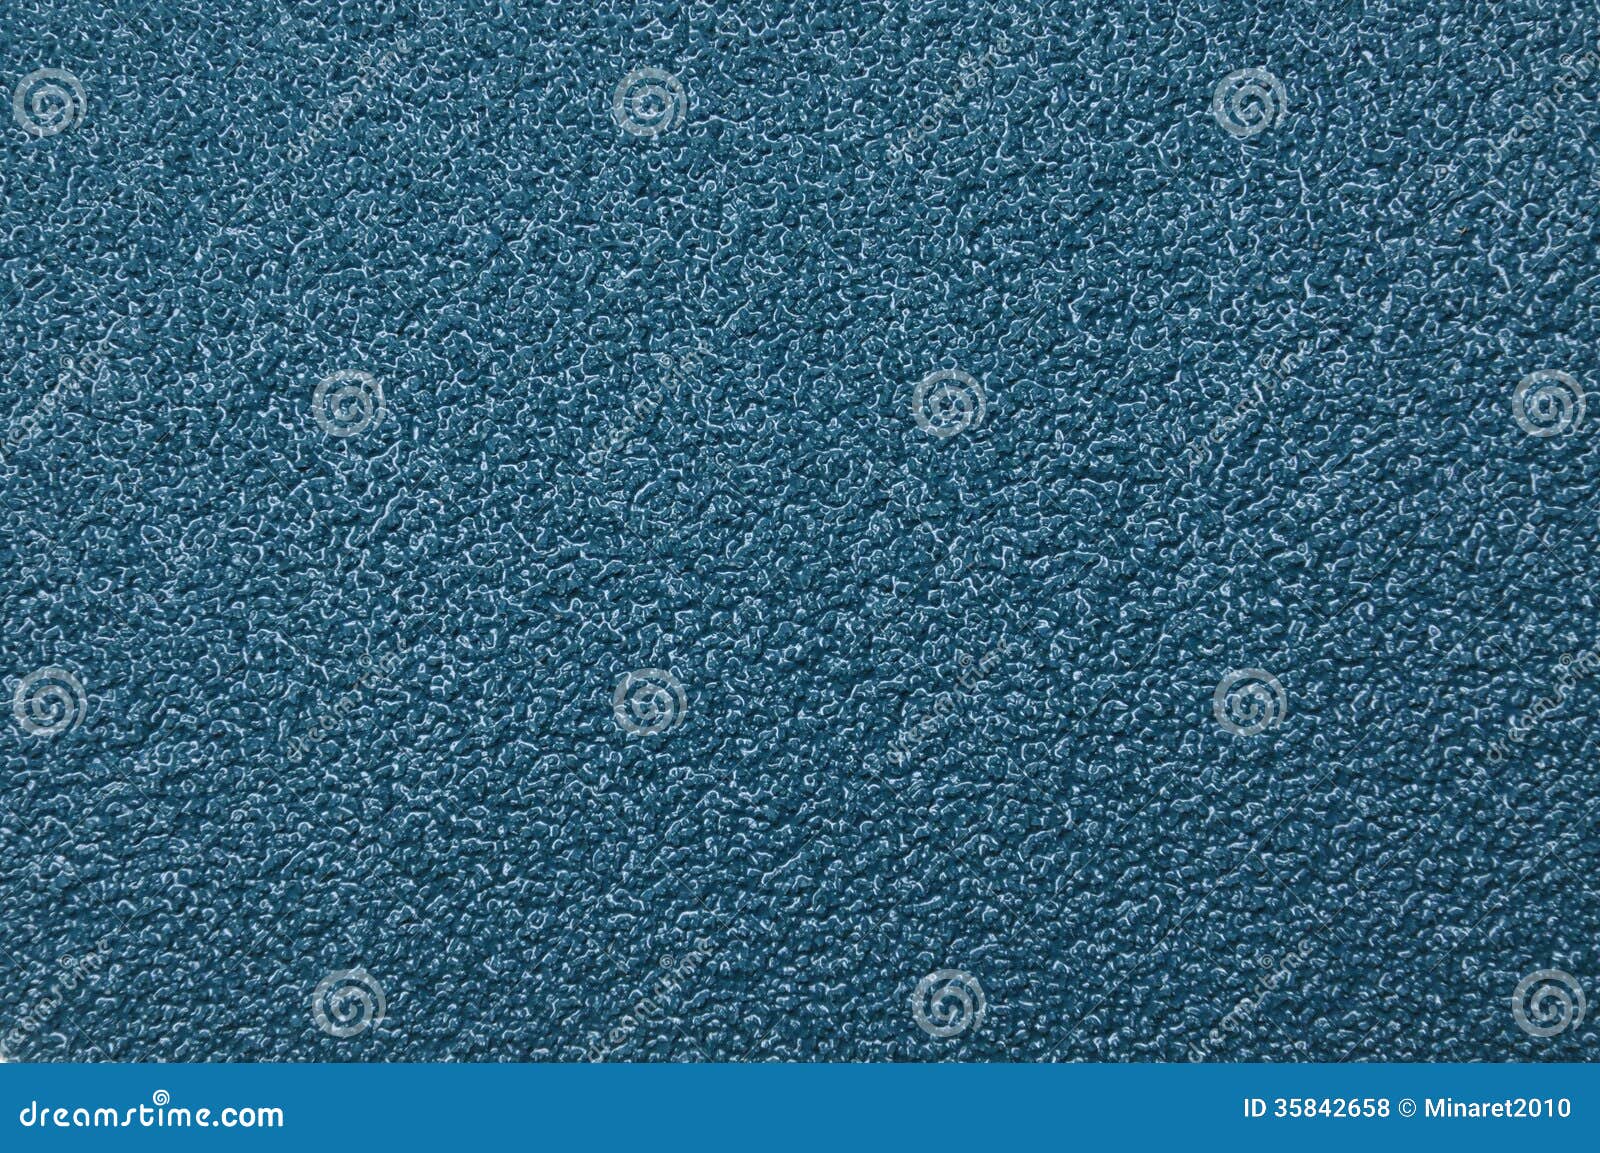 Surface of blue sandpaper stock photo. Image of empty - 35842658